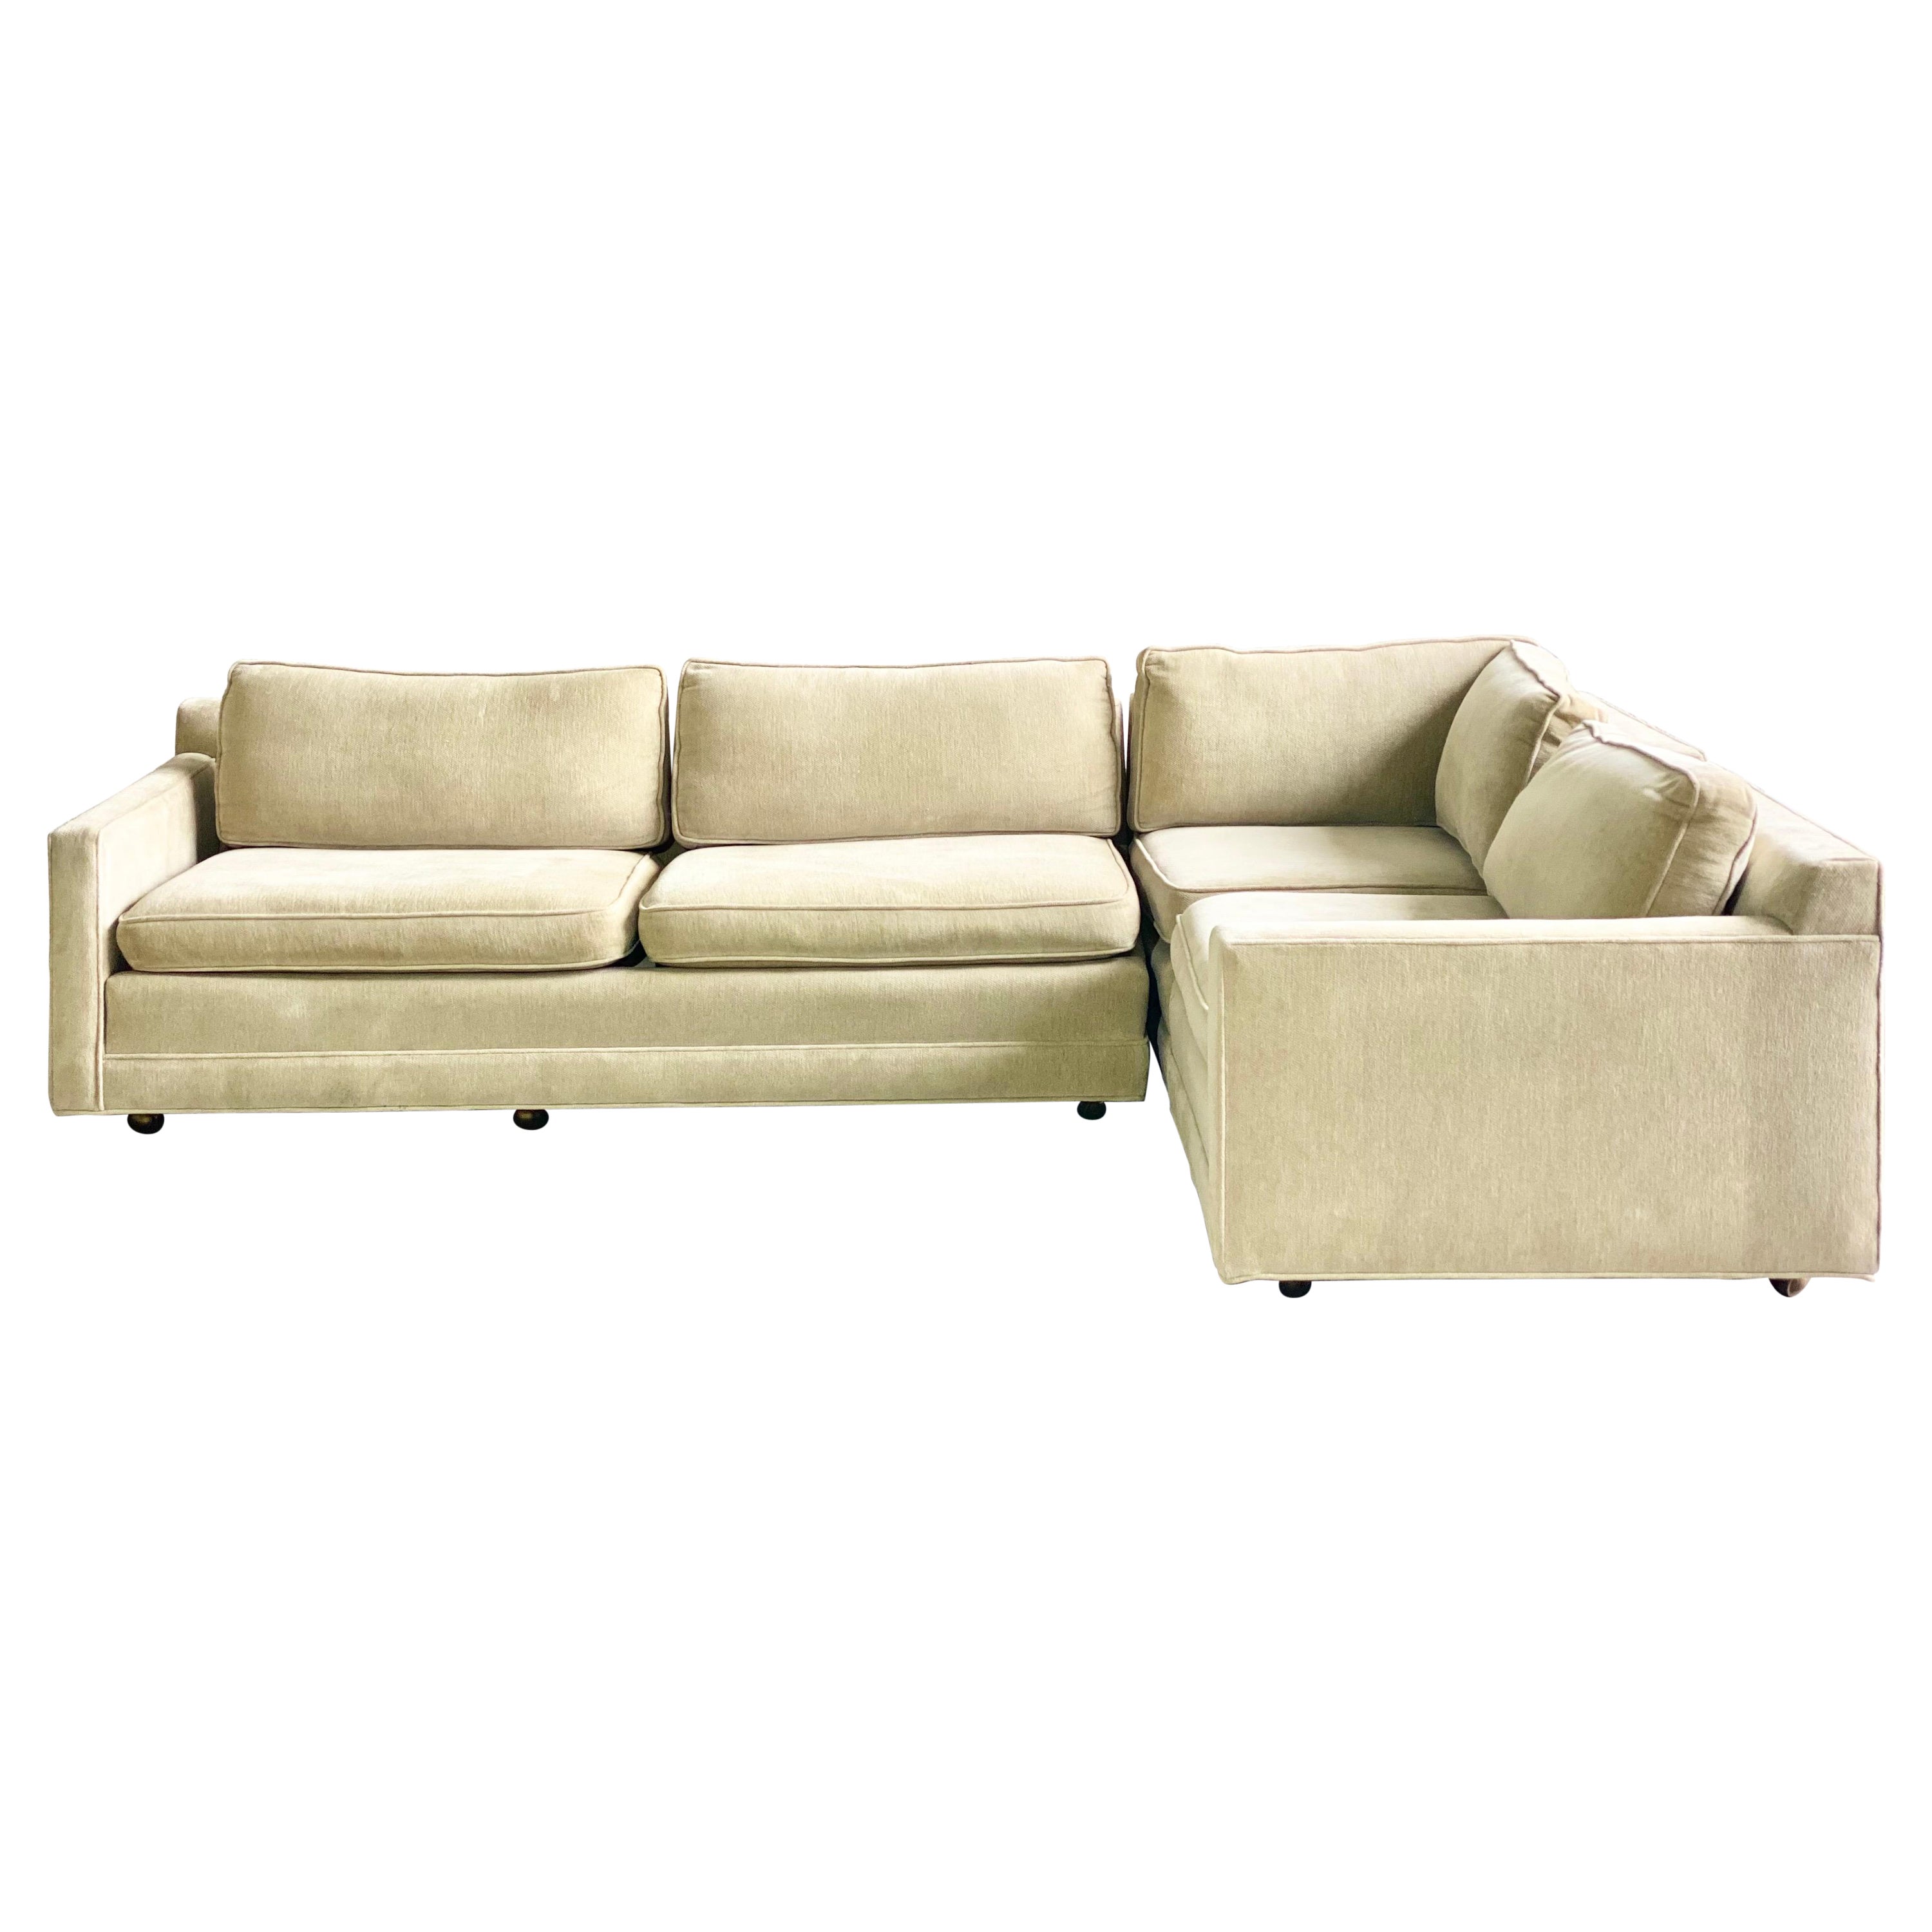 1980s Milo Baughman Style Three Piece L-Shaped Sectional